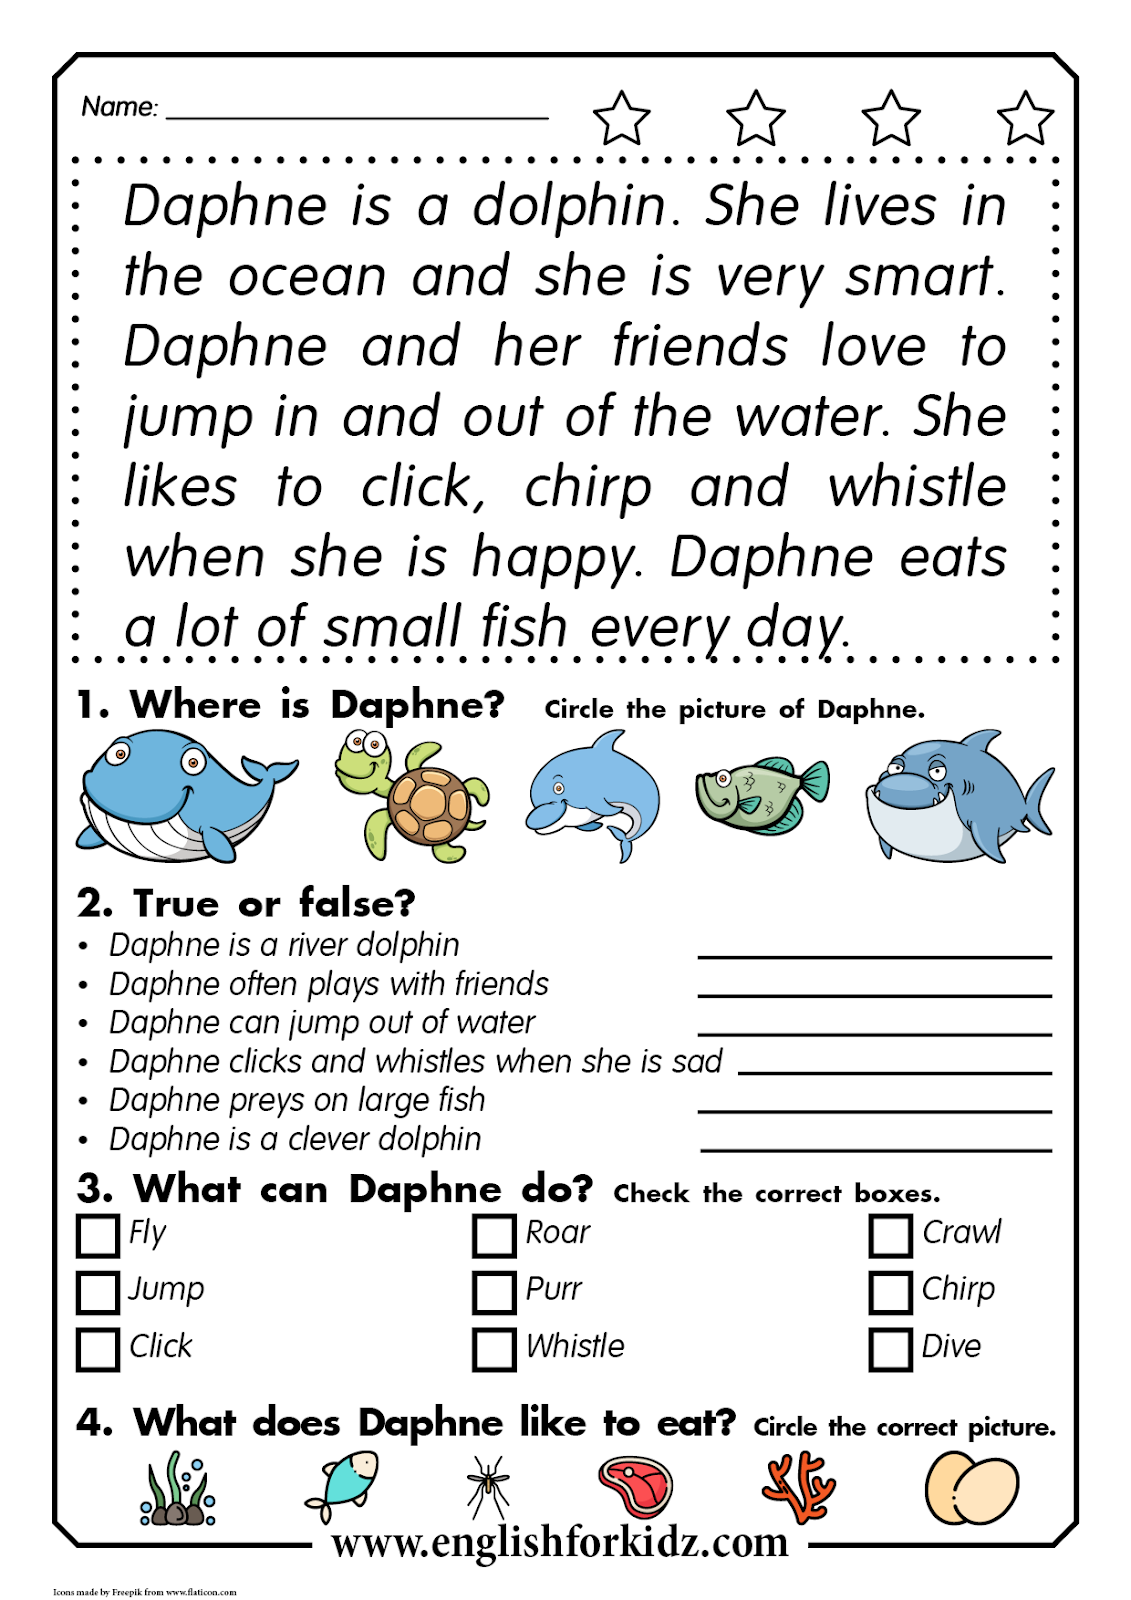 English for Kids Step by Step: Reading Comprehension Worksheets: Daphne